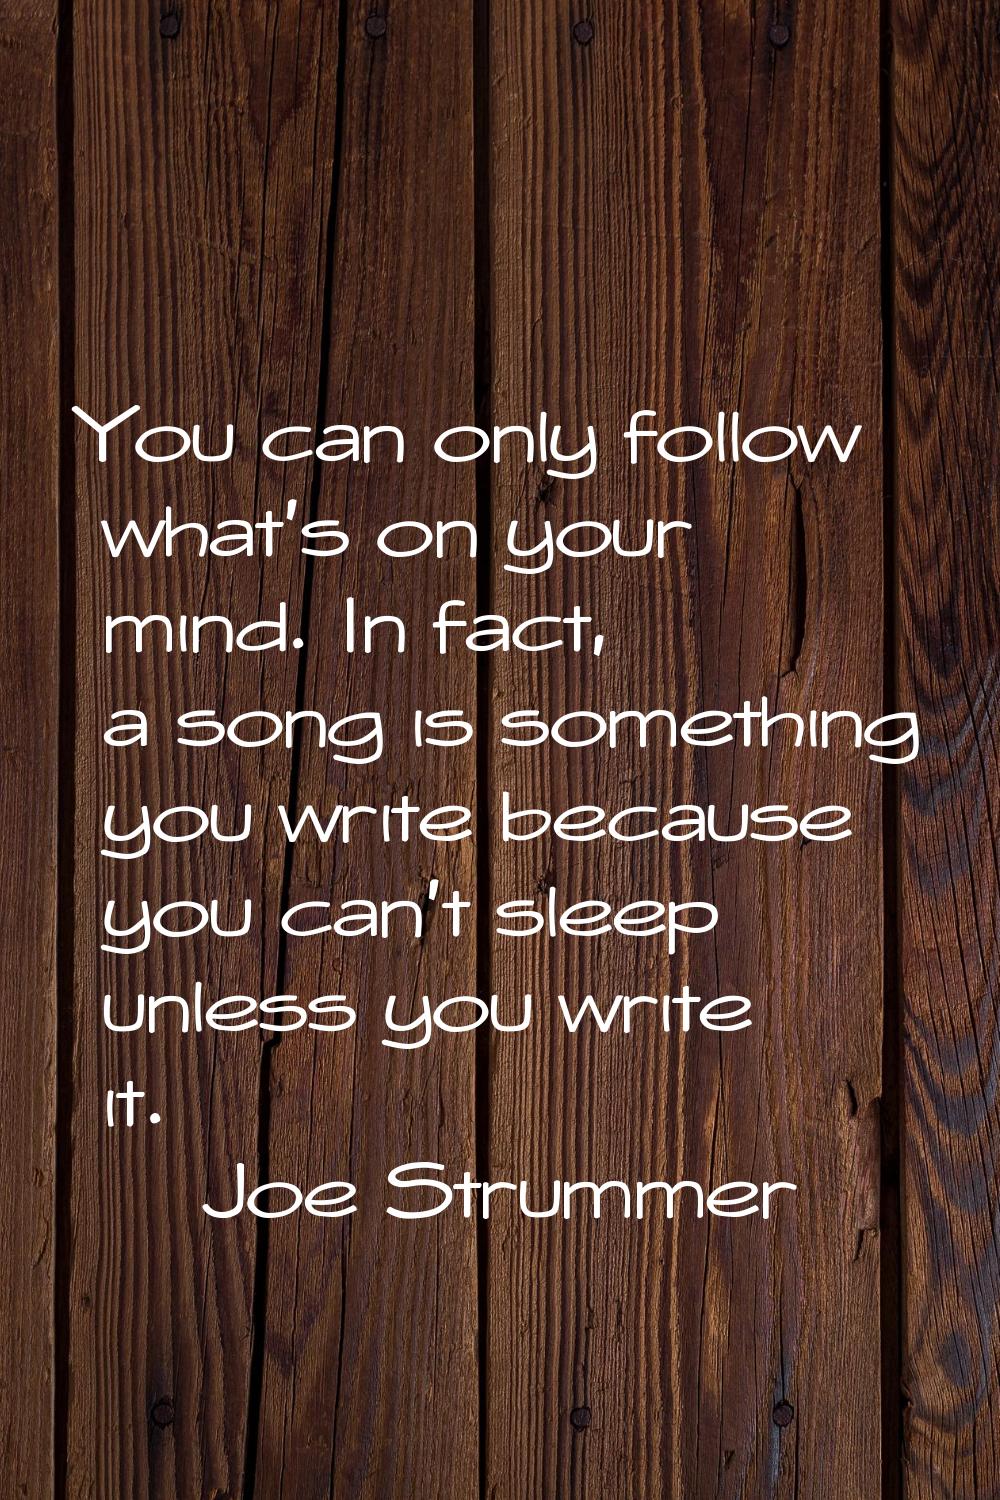 You can only follow what's on your mind. In fact, a song is something you write because you can't s